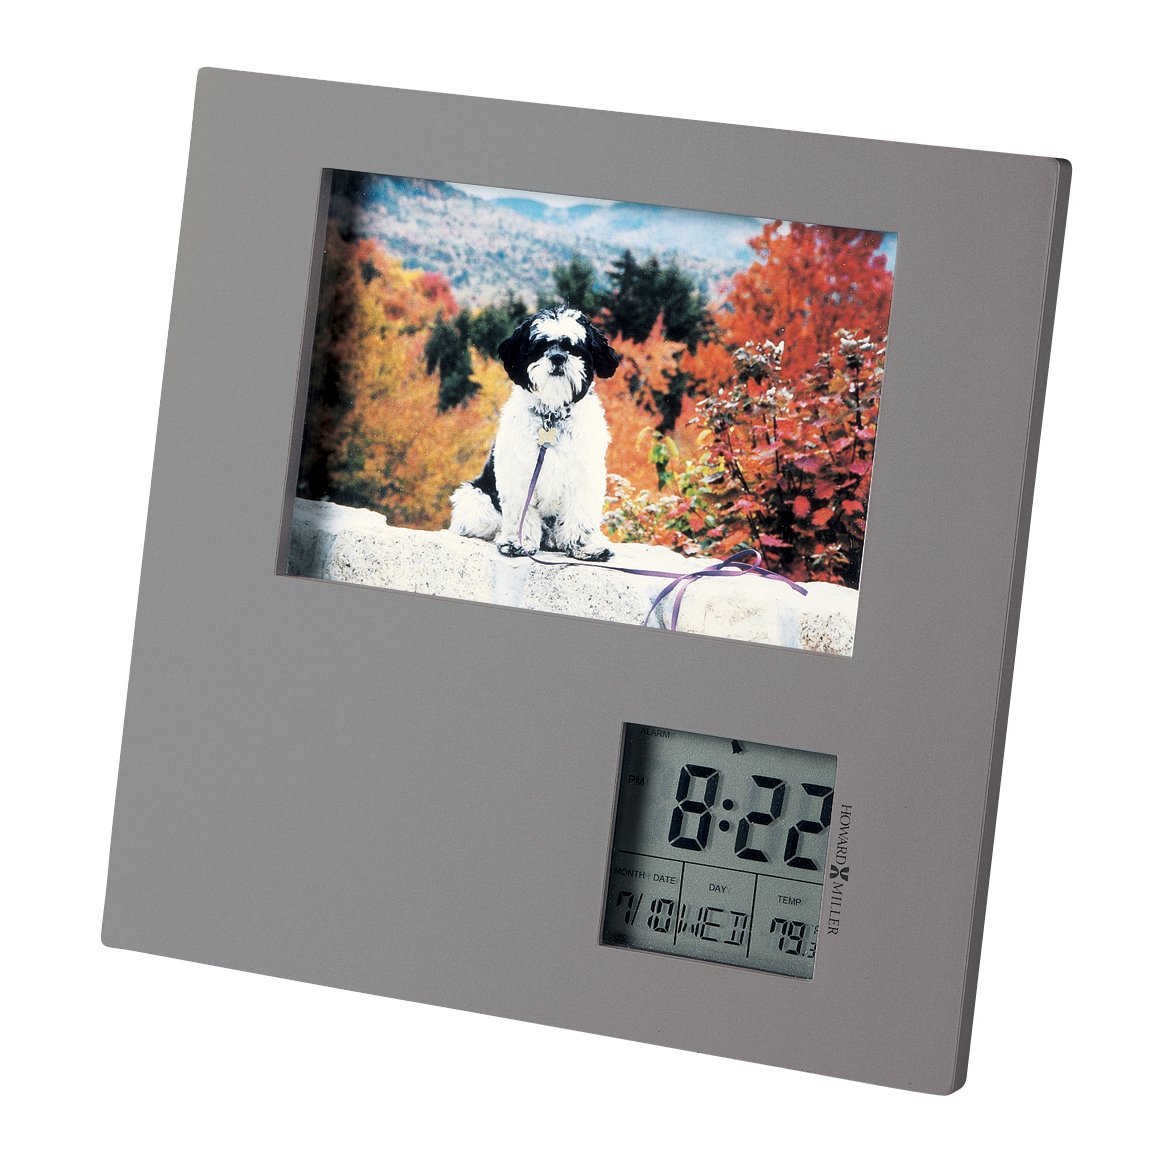 Howard Miller Picture This Table Clock 645553 - Premier Clocks